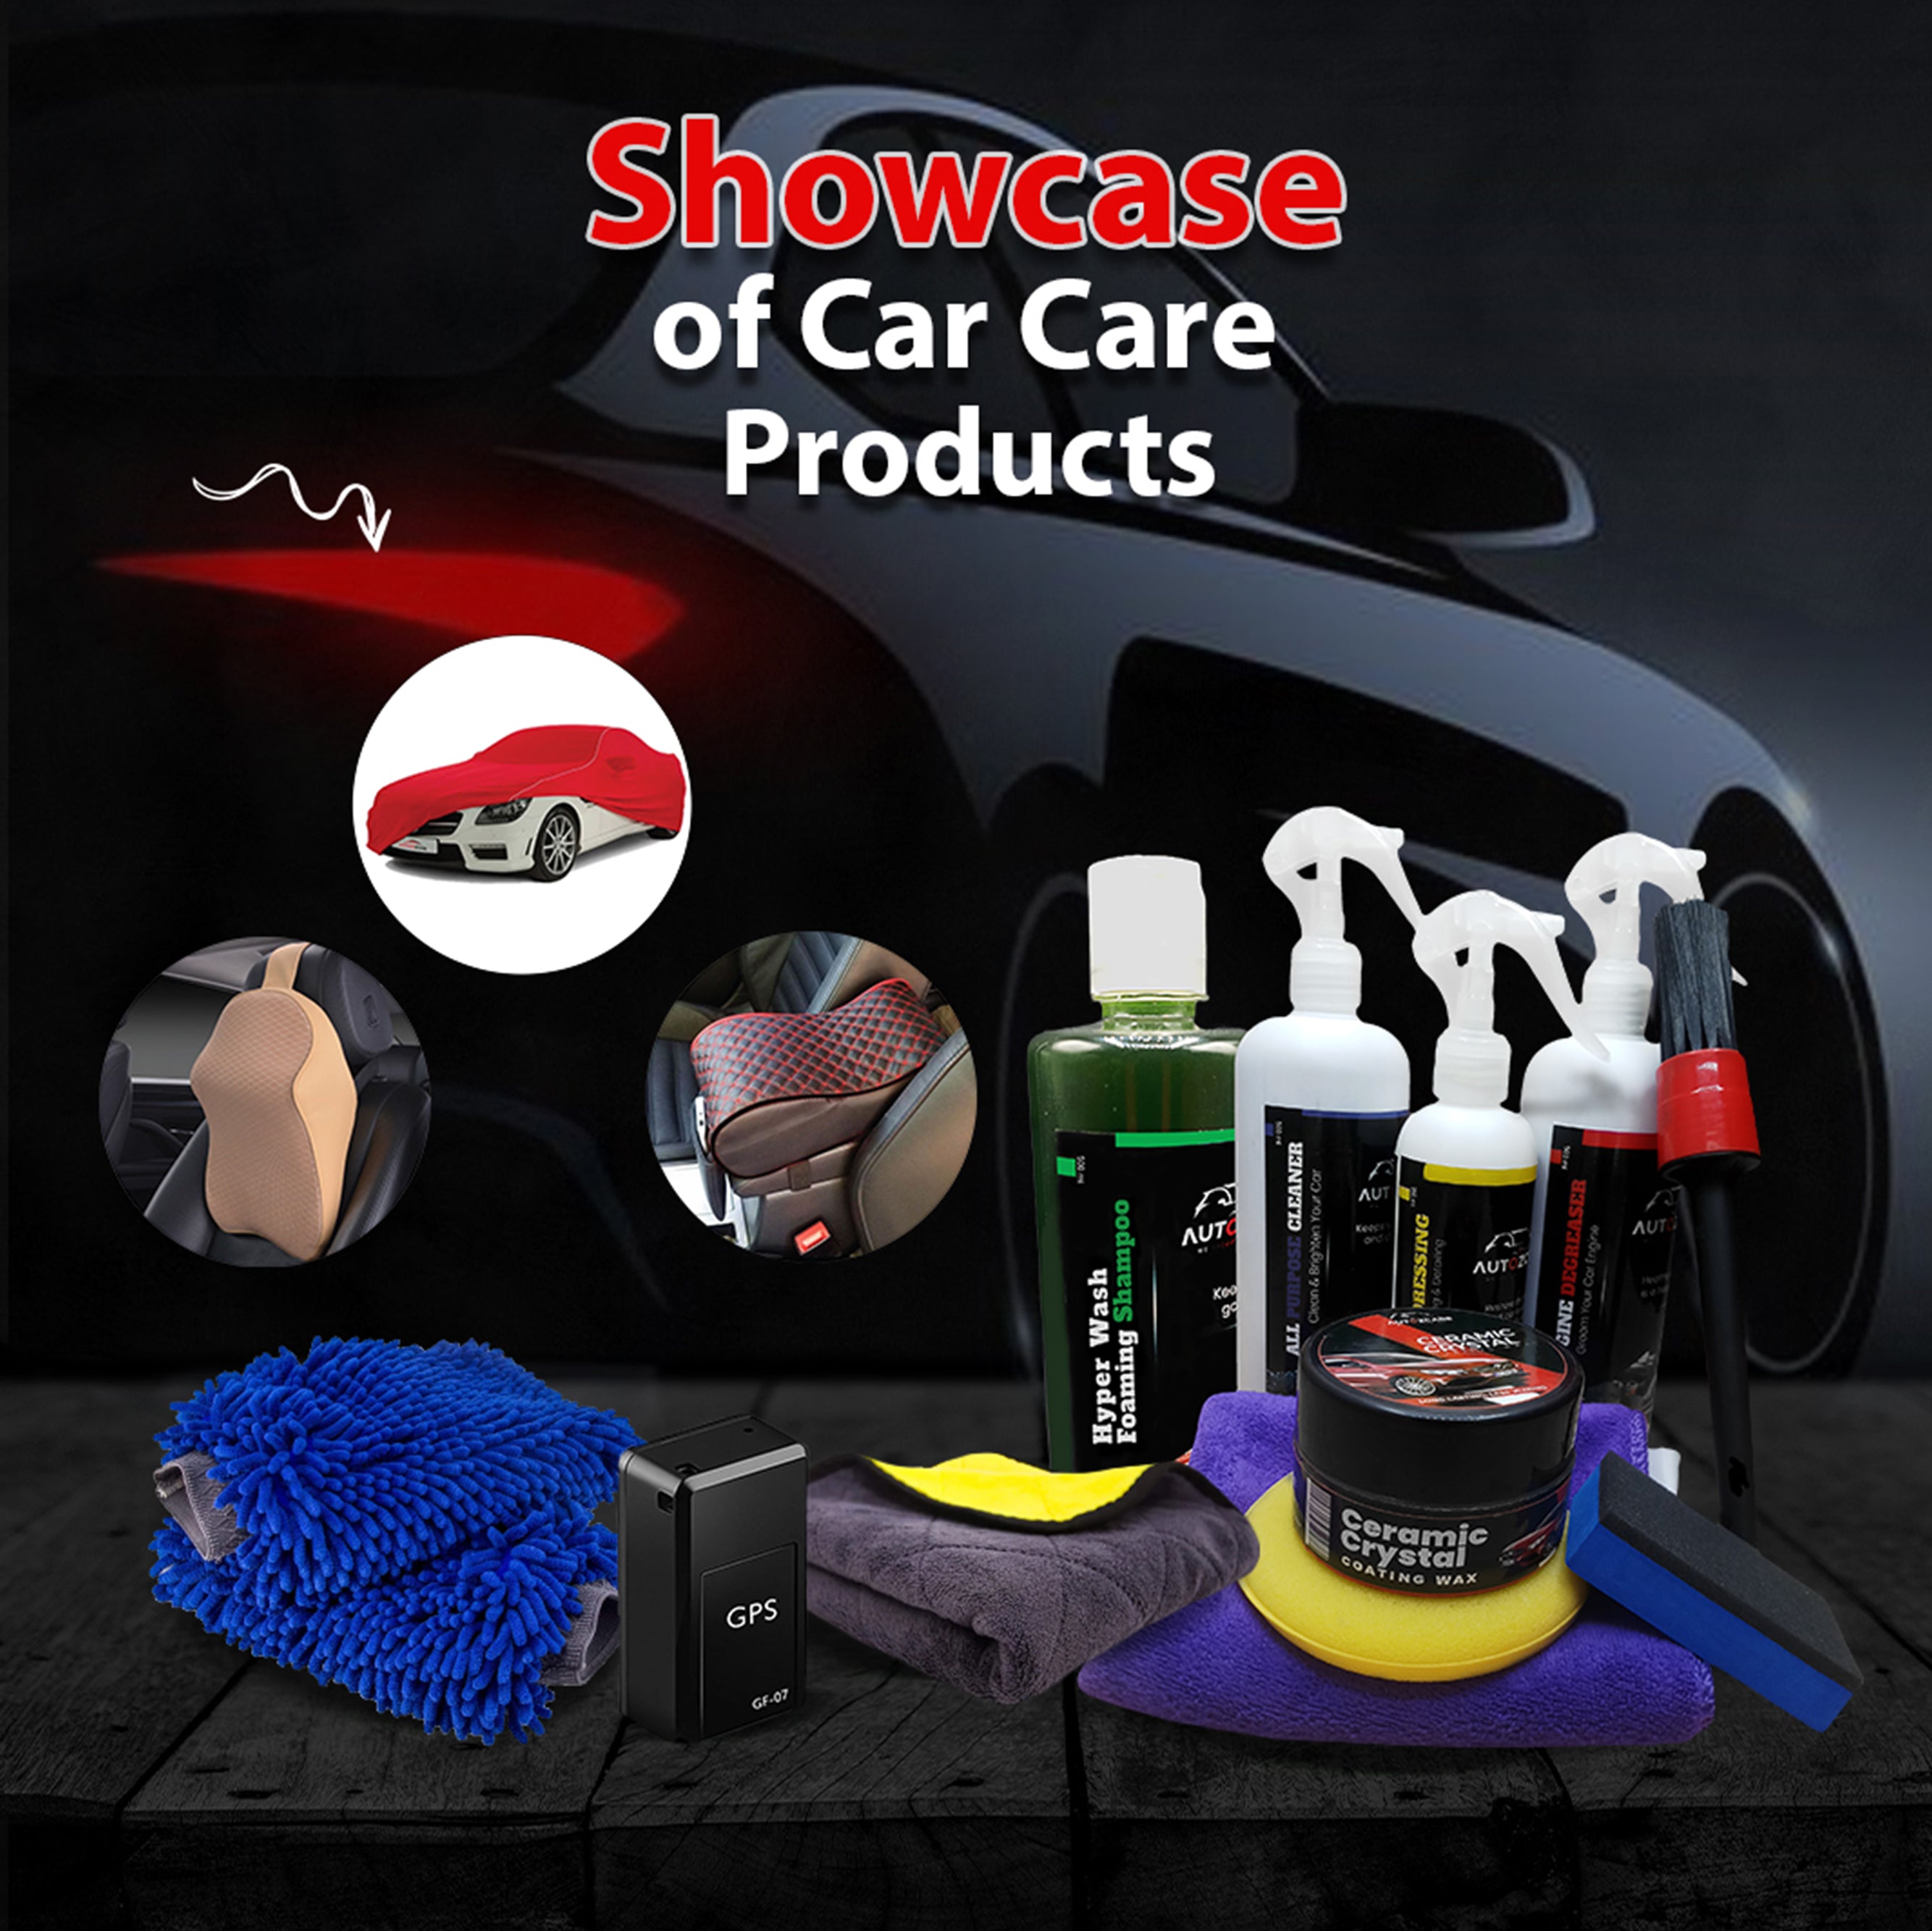 Showcase of Car Care Products